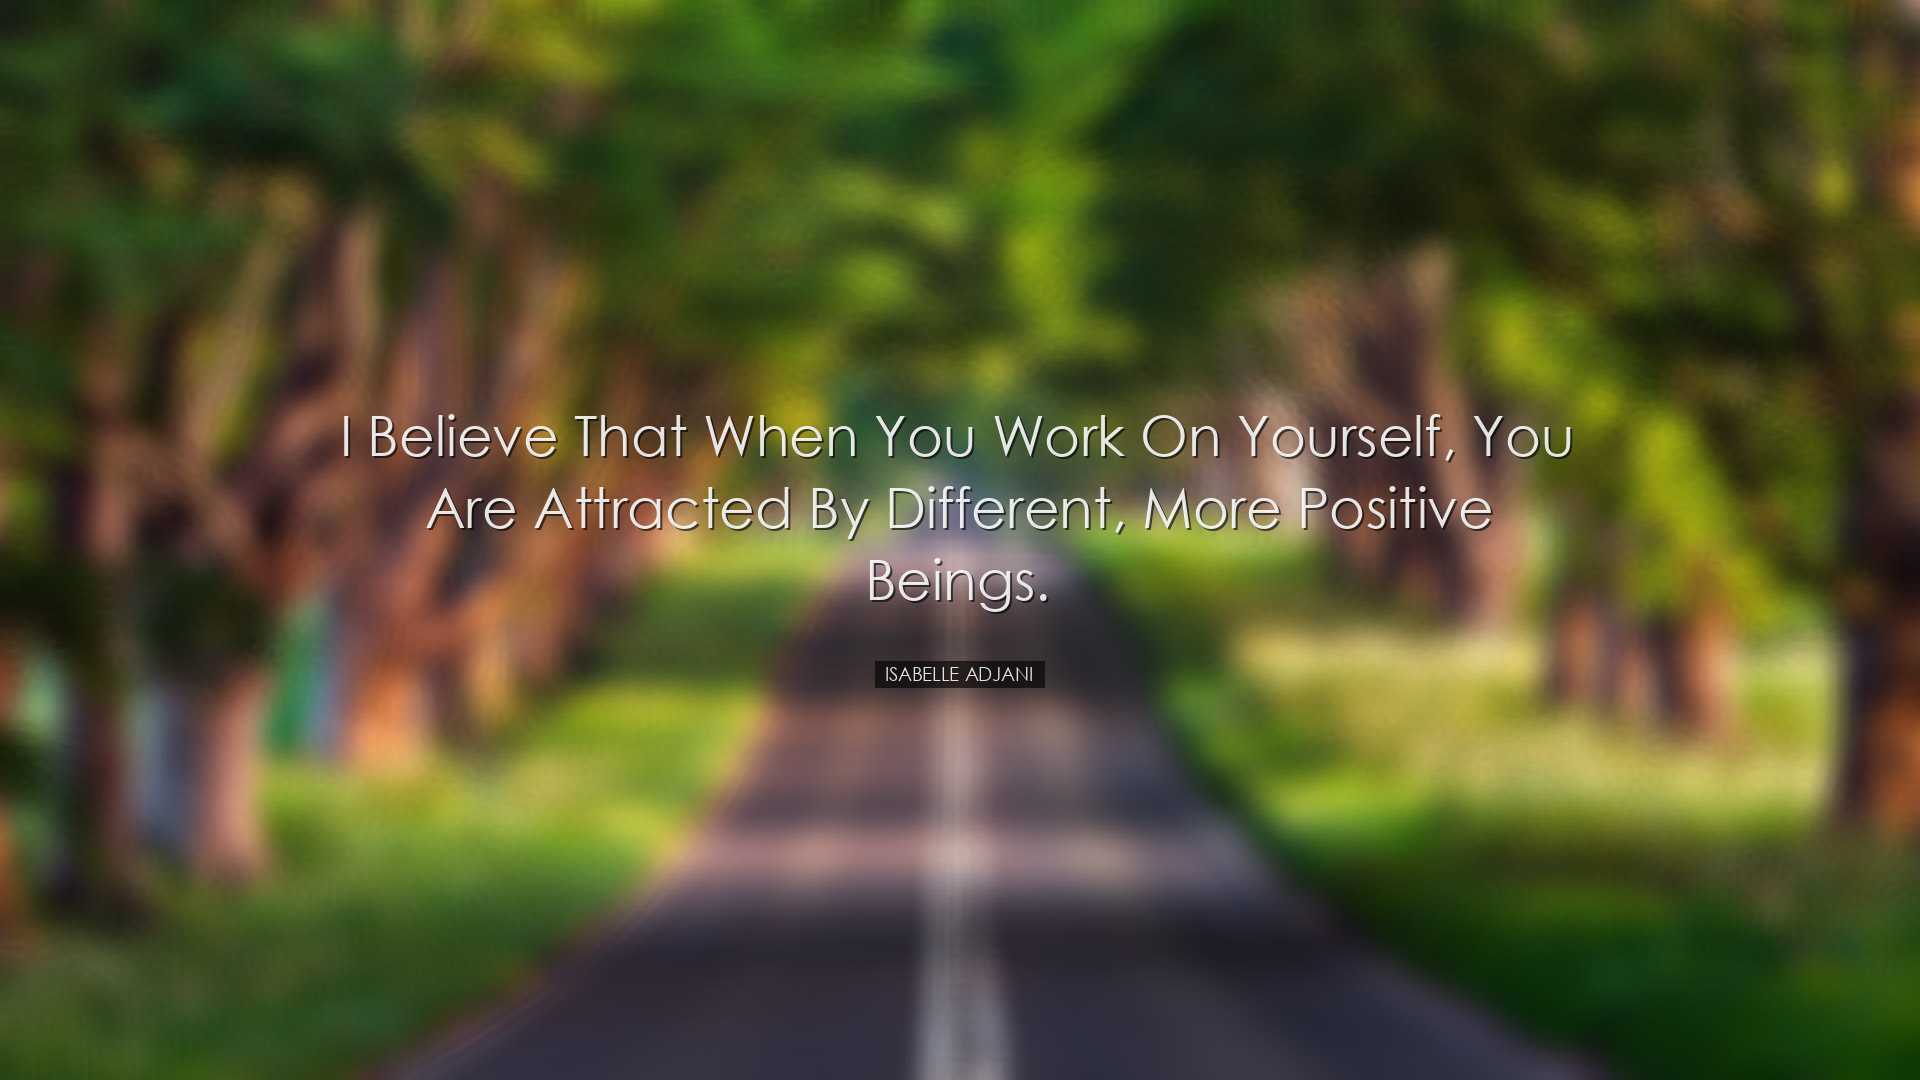 I believe that when you work on yourself, you are attracted by dif